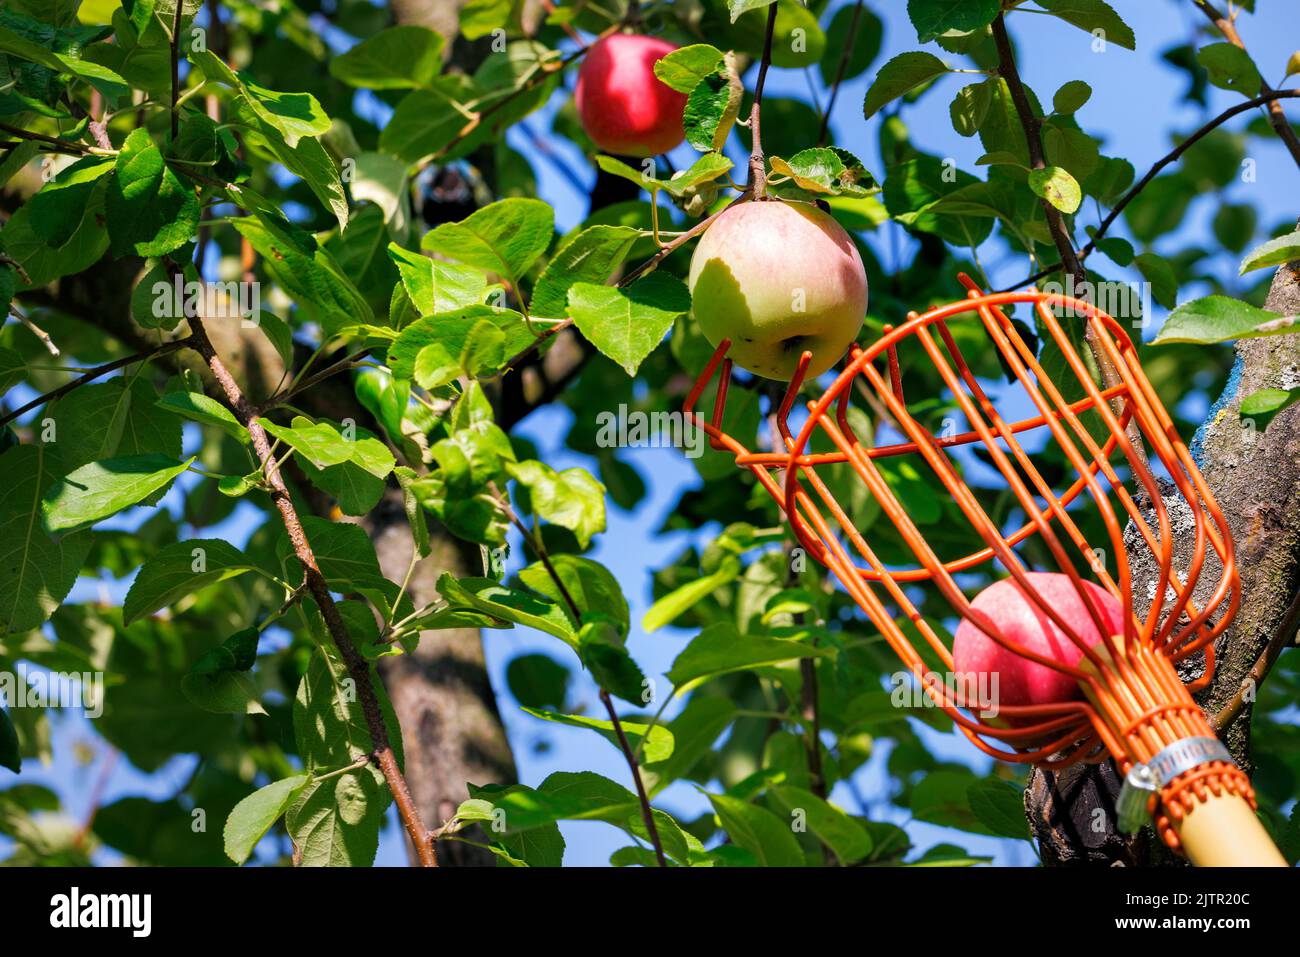 Harvesting ripe apples by a metal picker on a blurred background of green leaves on a sunny summer day. Stock Photo